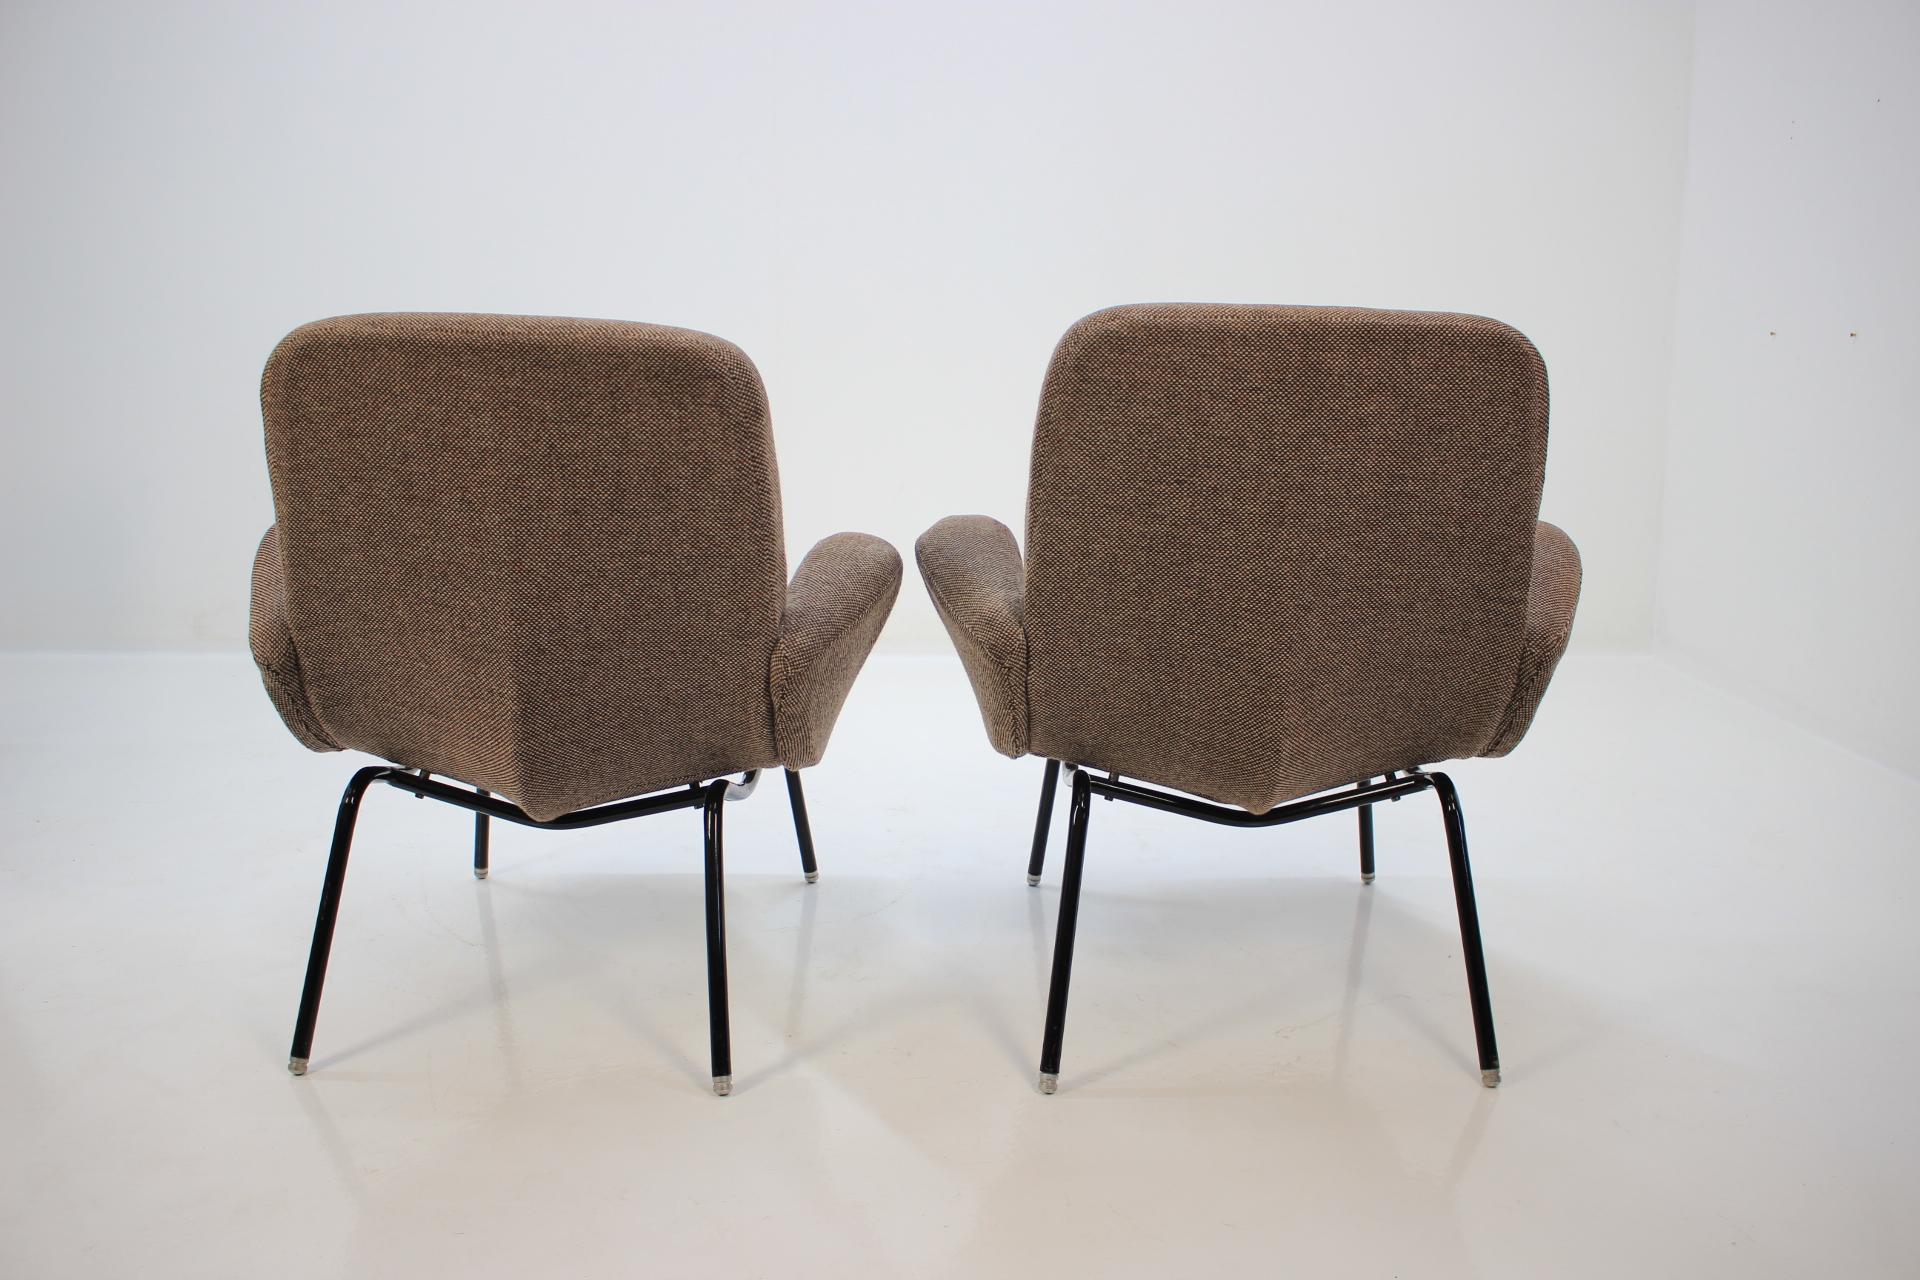 Steel Armchairs and Chairs by Alan Fuchs, 1961